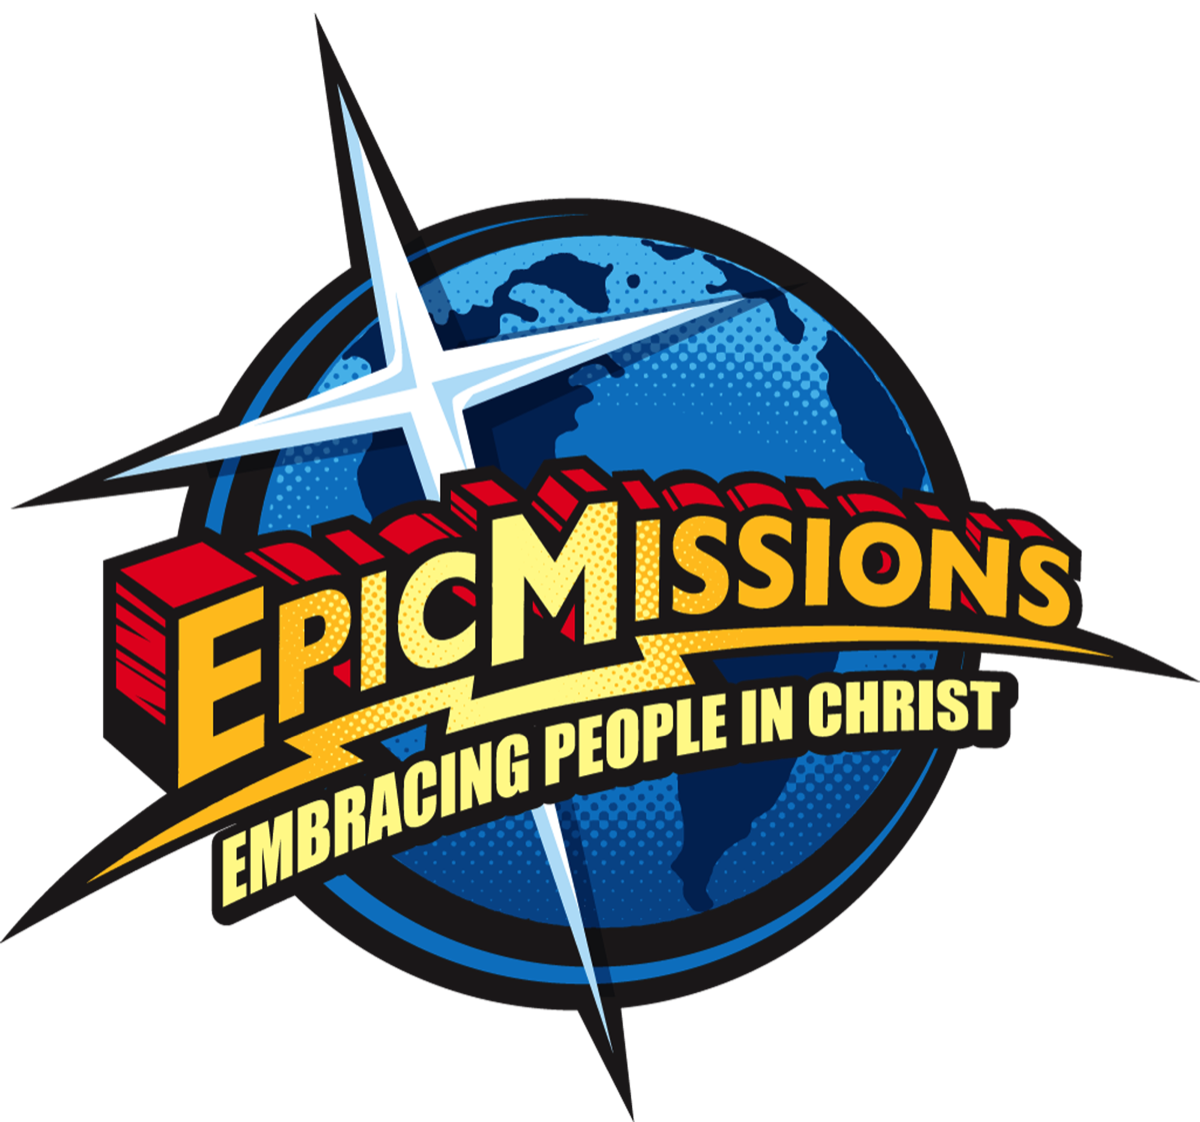 Epic Missions, Inc Is A Christian Founded 501c3 Organization - Epic Missions Vero Beach (1200x1122)